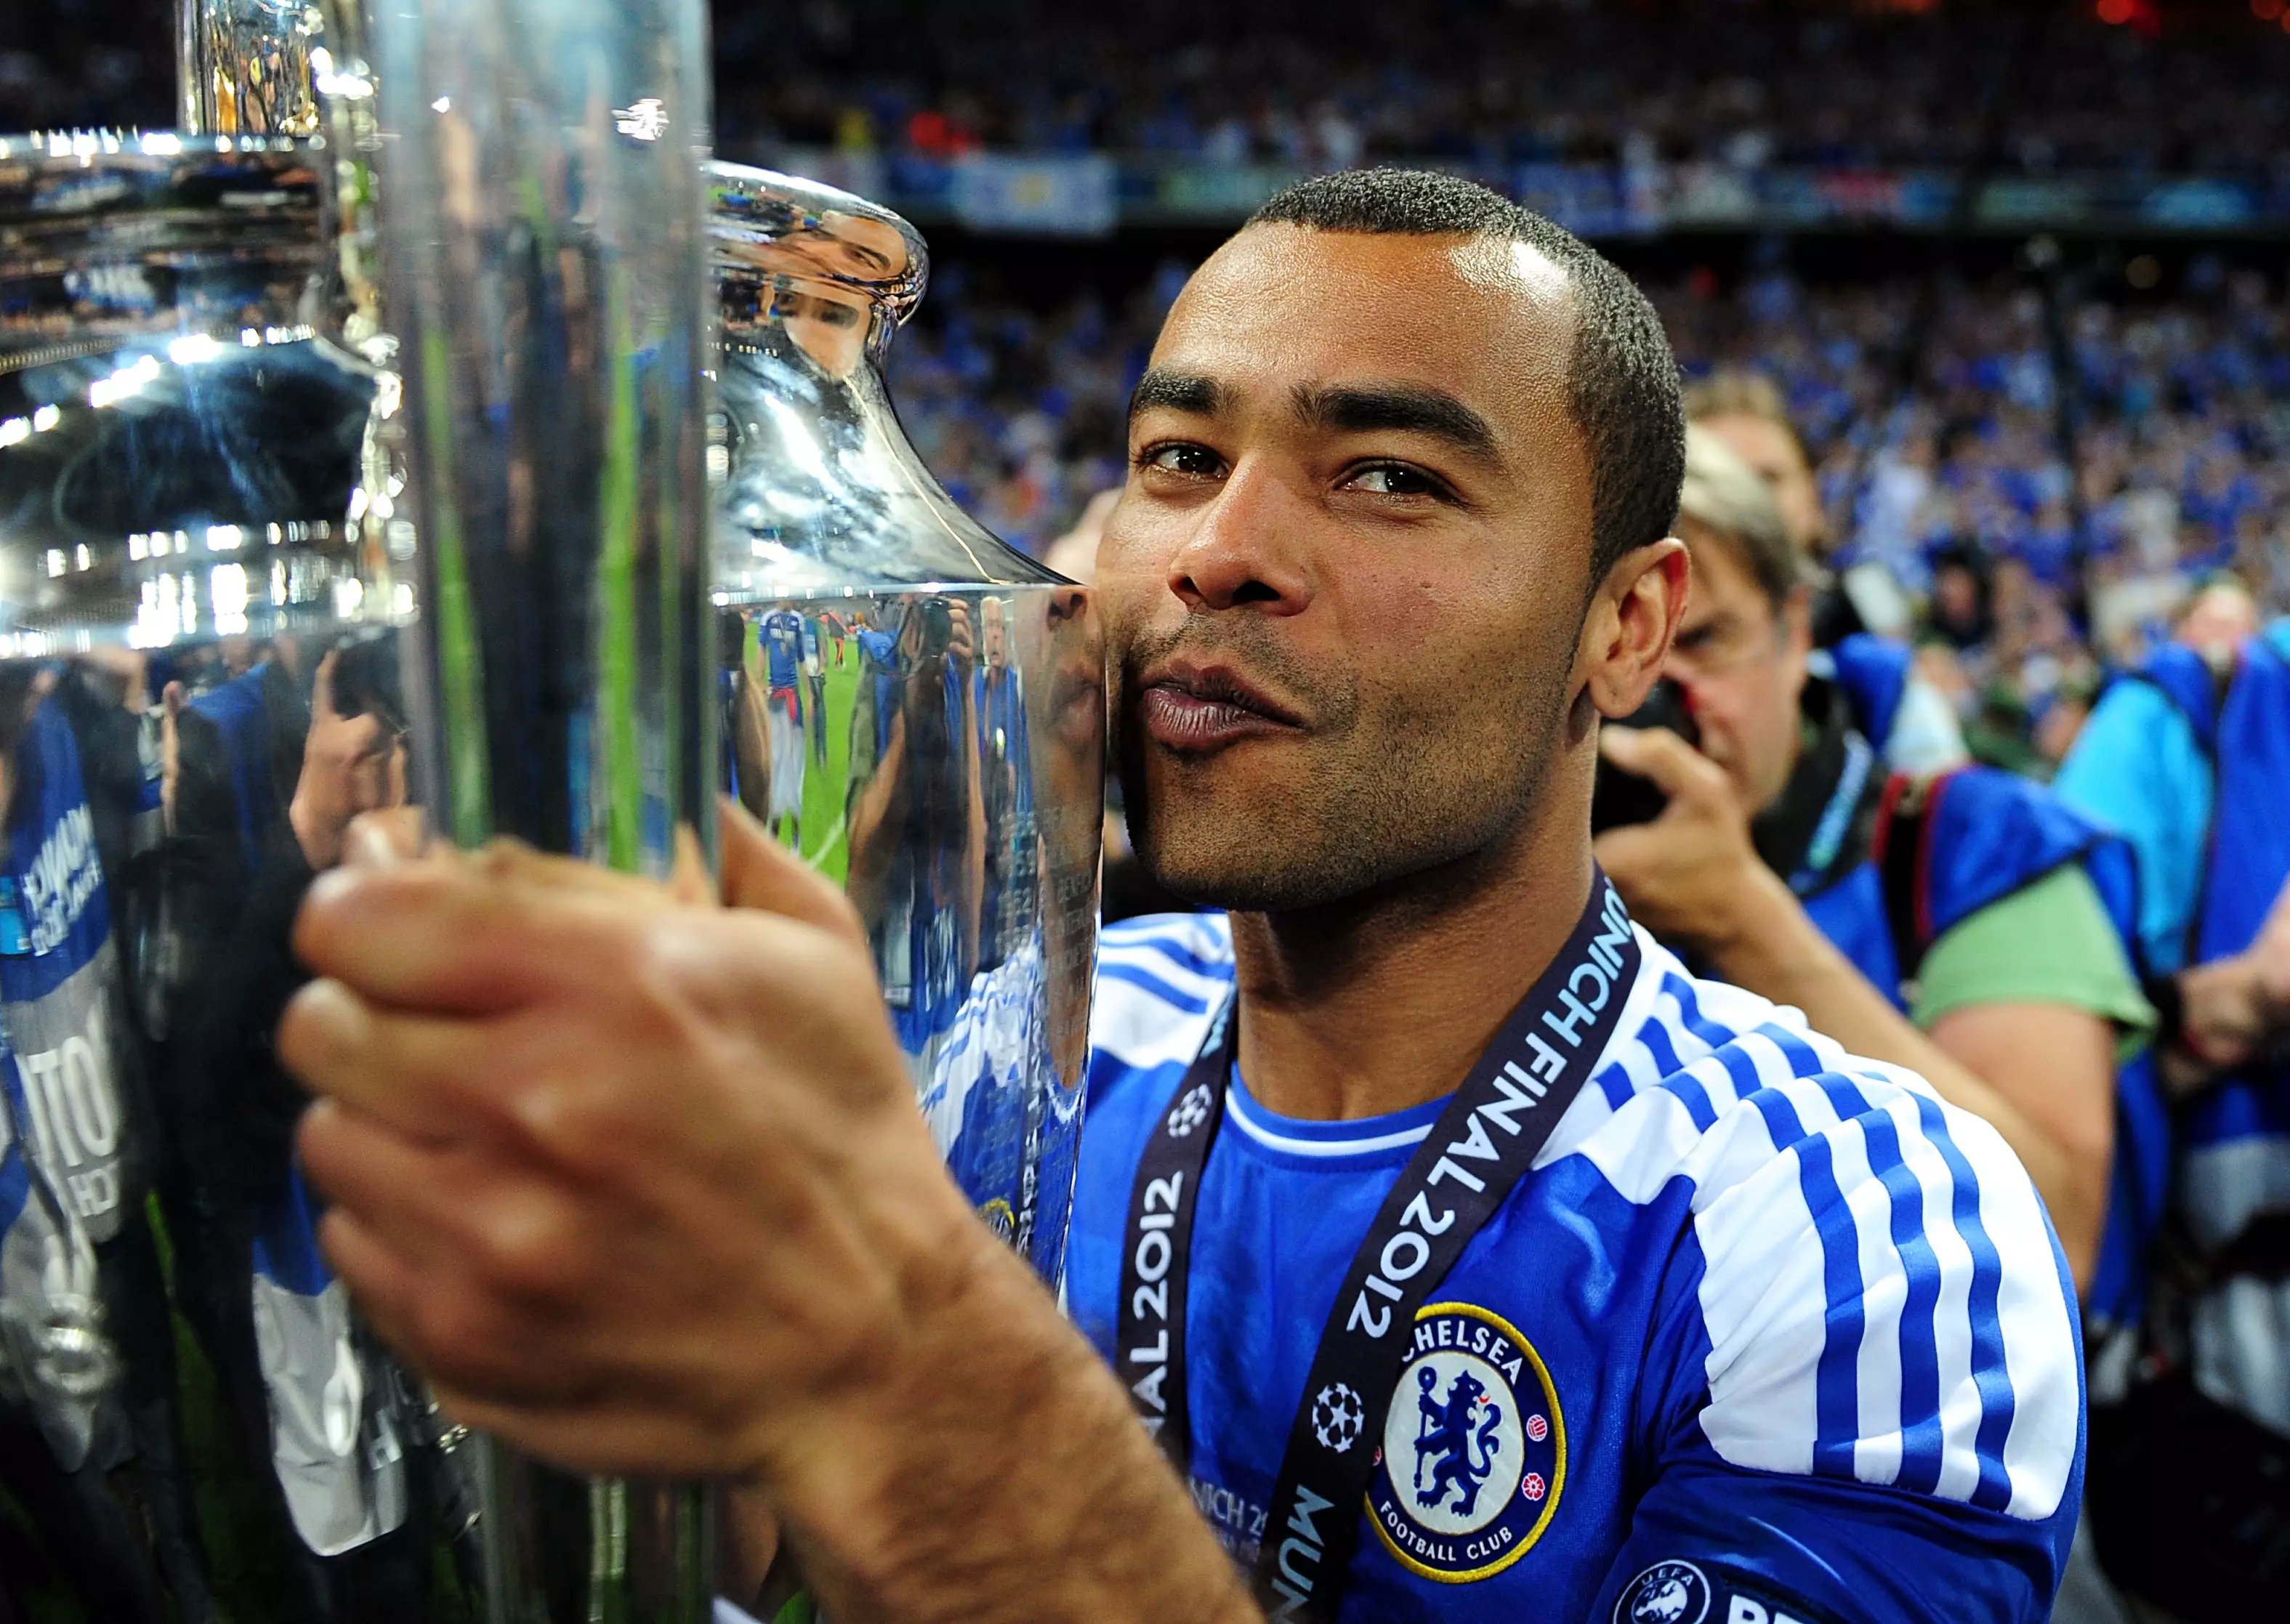 Cole is another Champions League winner with the west London team. Image: PA Images